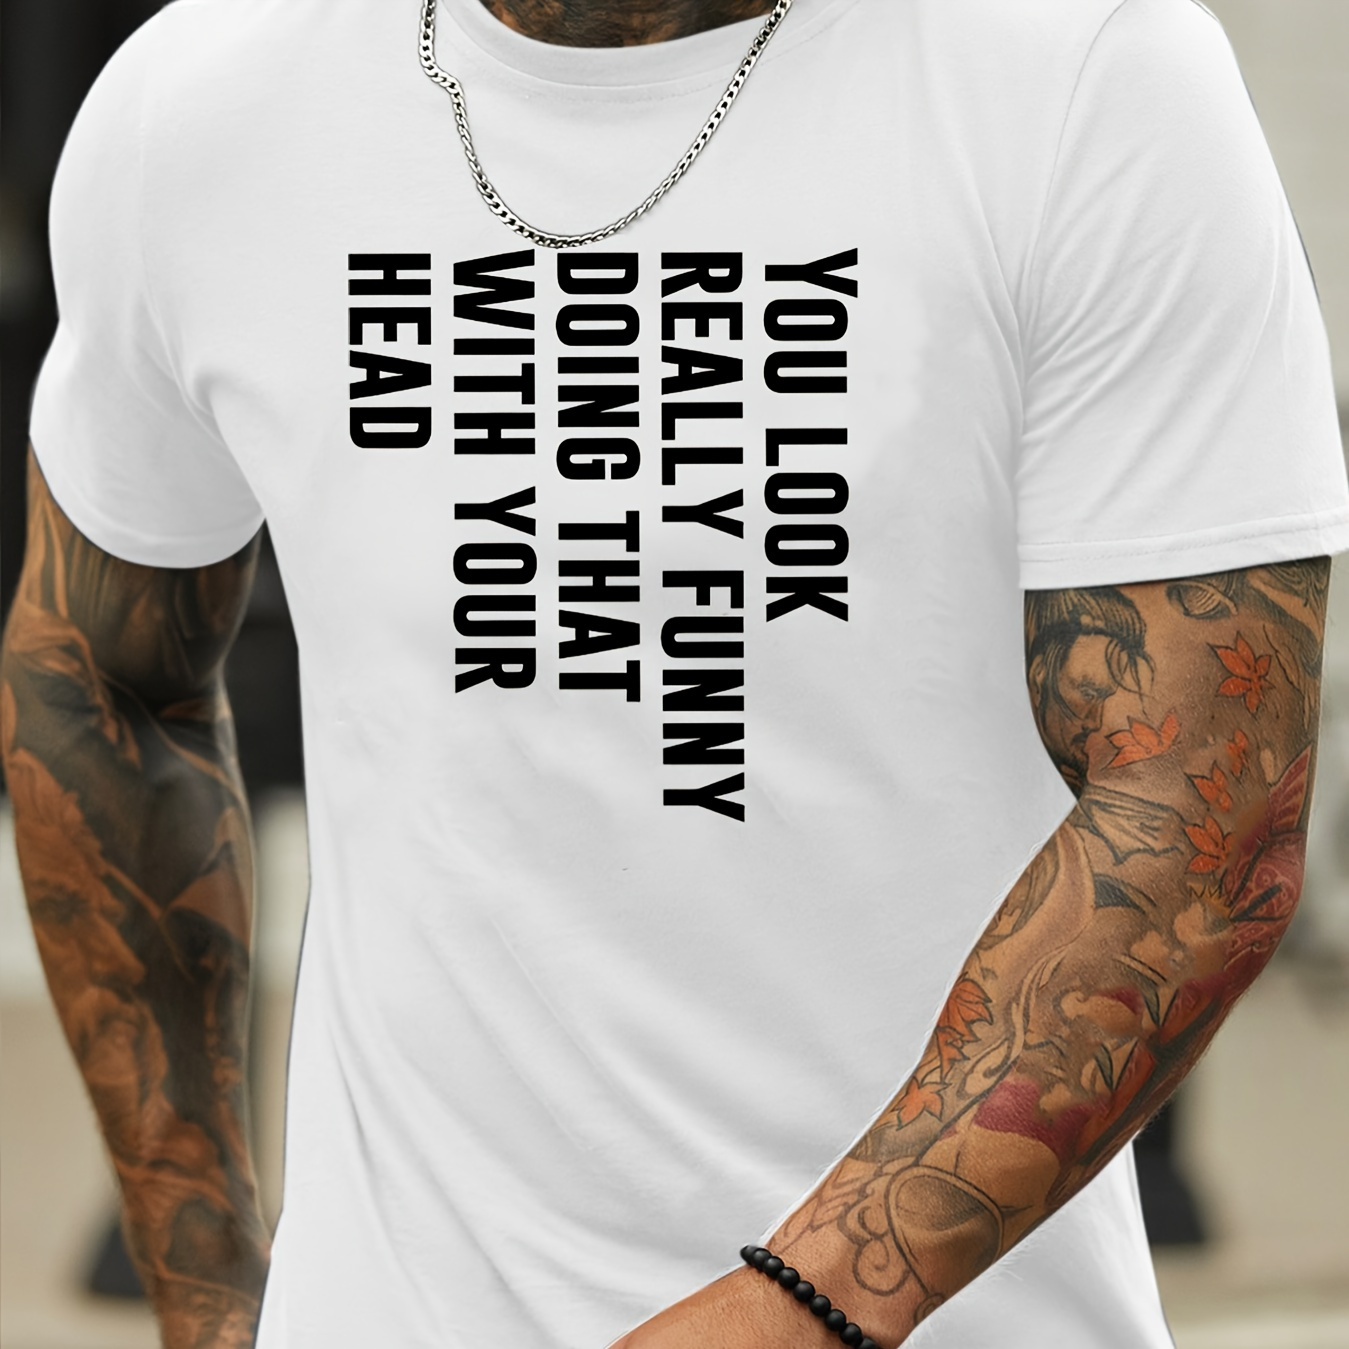 

Men's Casual Novelty T-shirt, " You Look Really Funny" Creative Print Short Sleeve Summer Top, Comfort Fit, Stylish Crew Neck Tee For Daily Wear